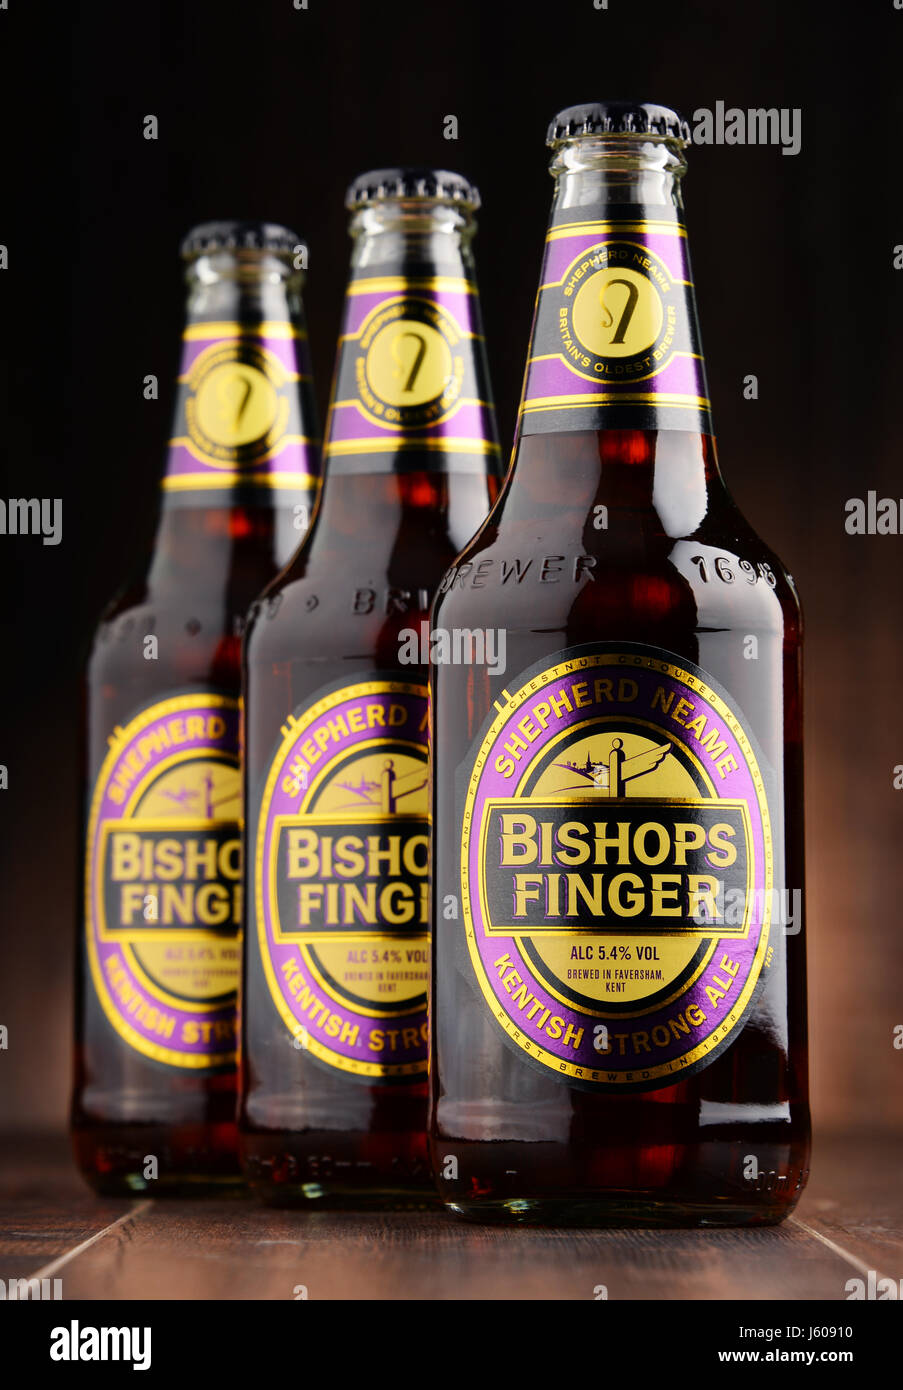 POZNAN, POLAND - AUGUST 12, 2016: Bishop's Finger  is a fine English Ale produced by Shepherd Neame, an independent regional brewery located in Favers Stock Photo